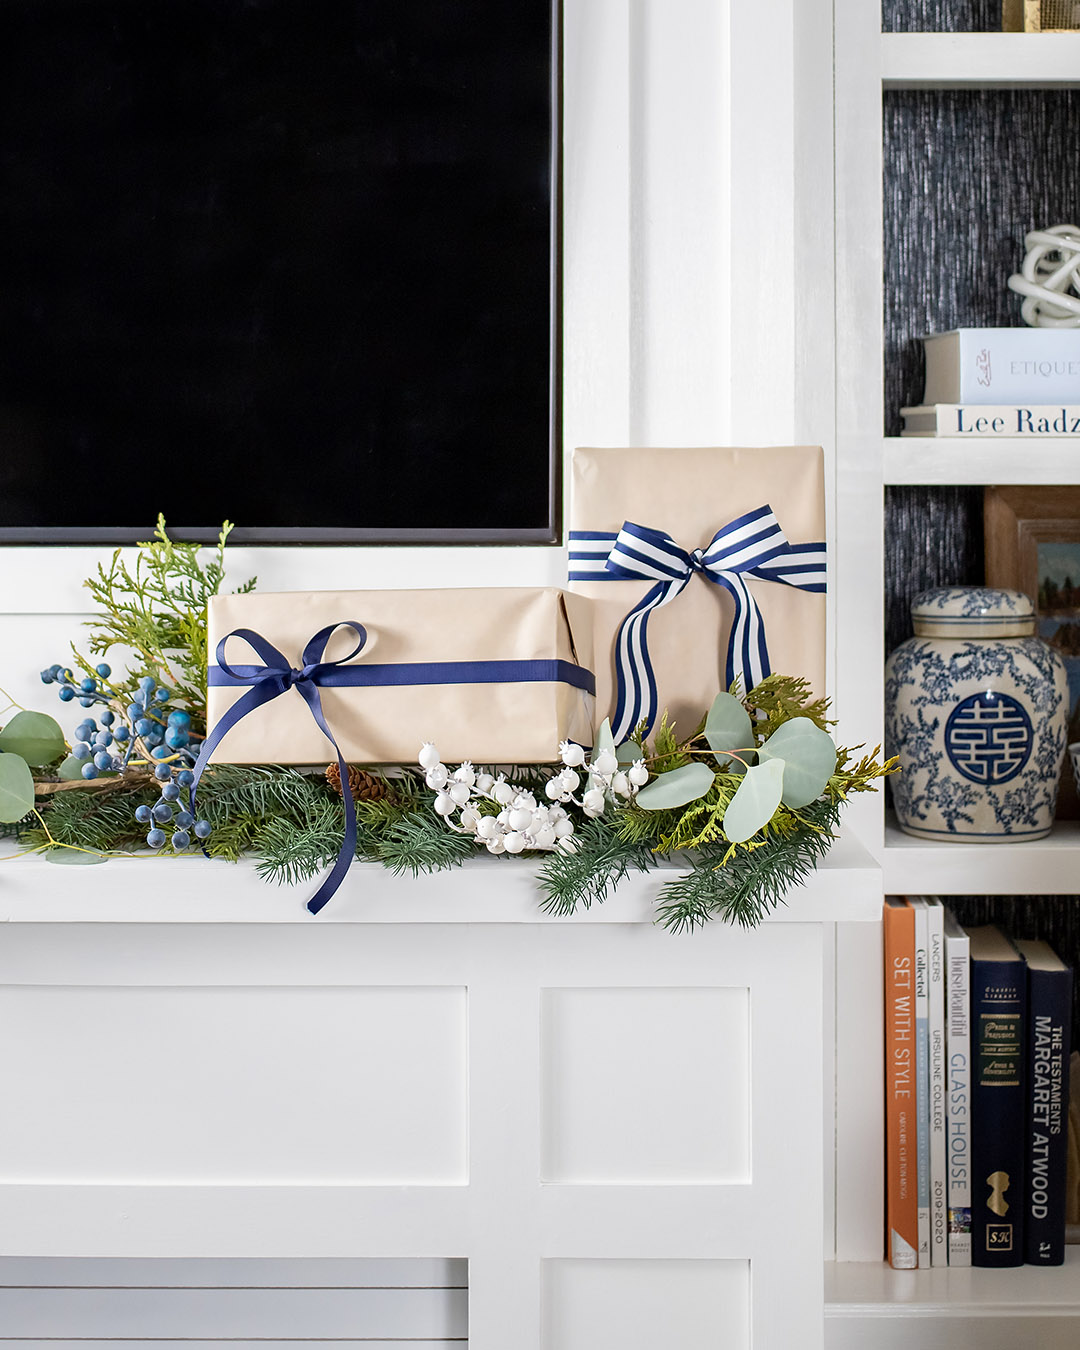 The first tree is up and it's officially Christmas season in our house! Today I'm going to share my blue and white Christmas decor from our living room!